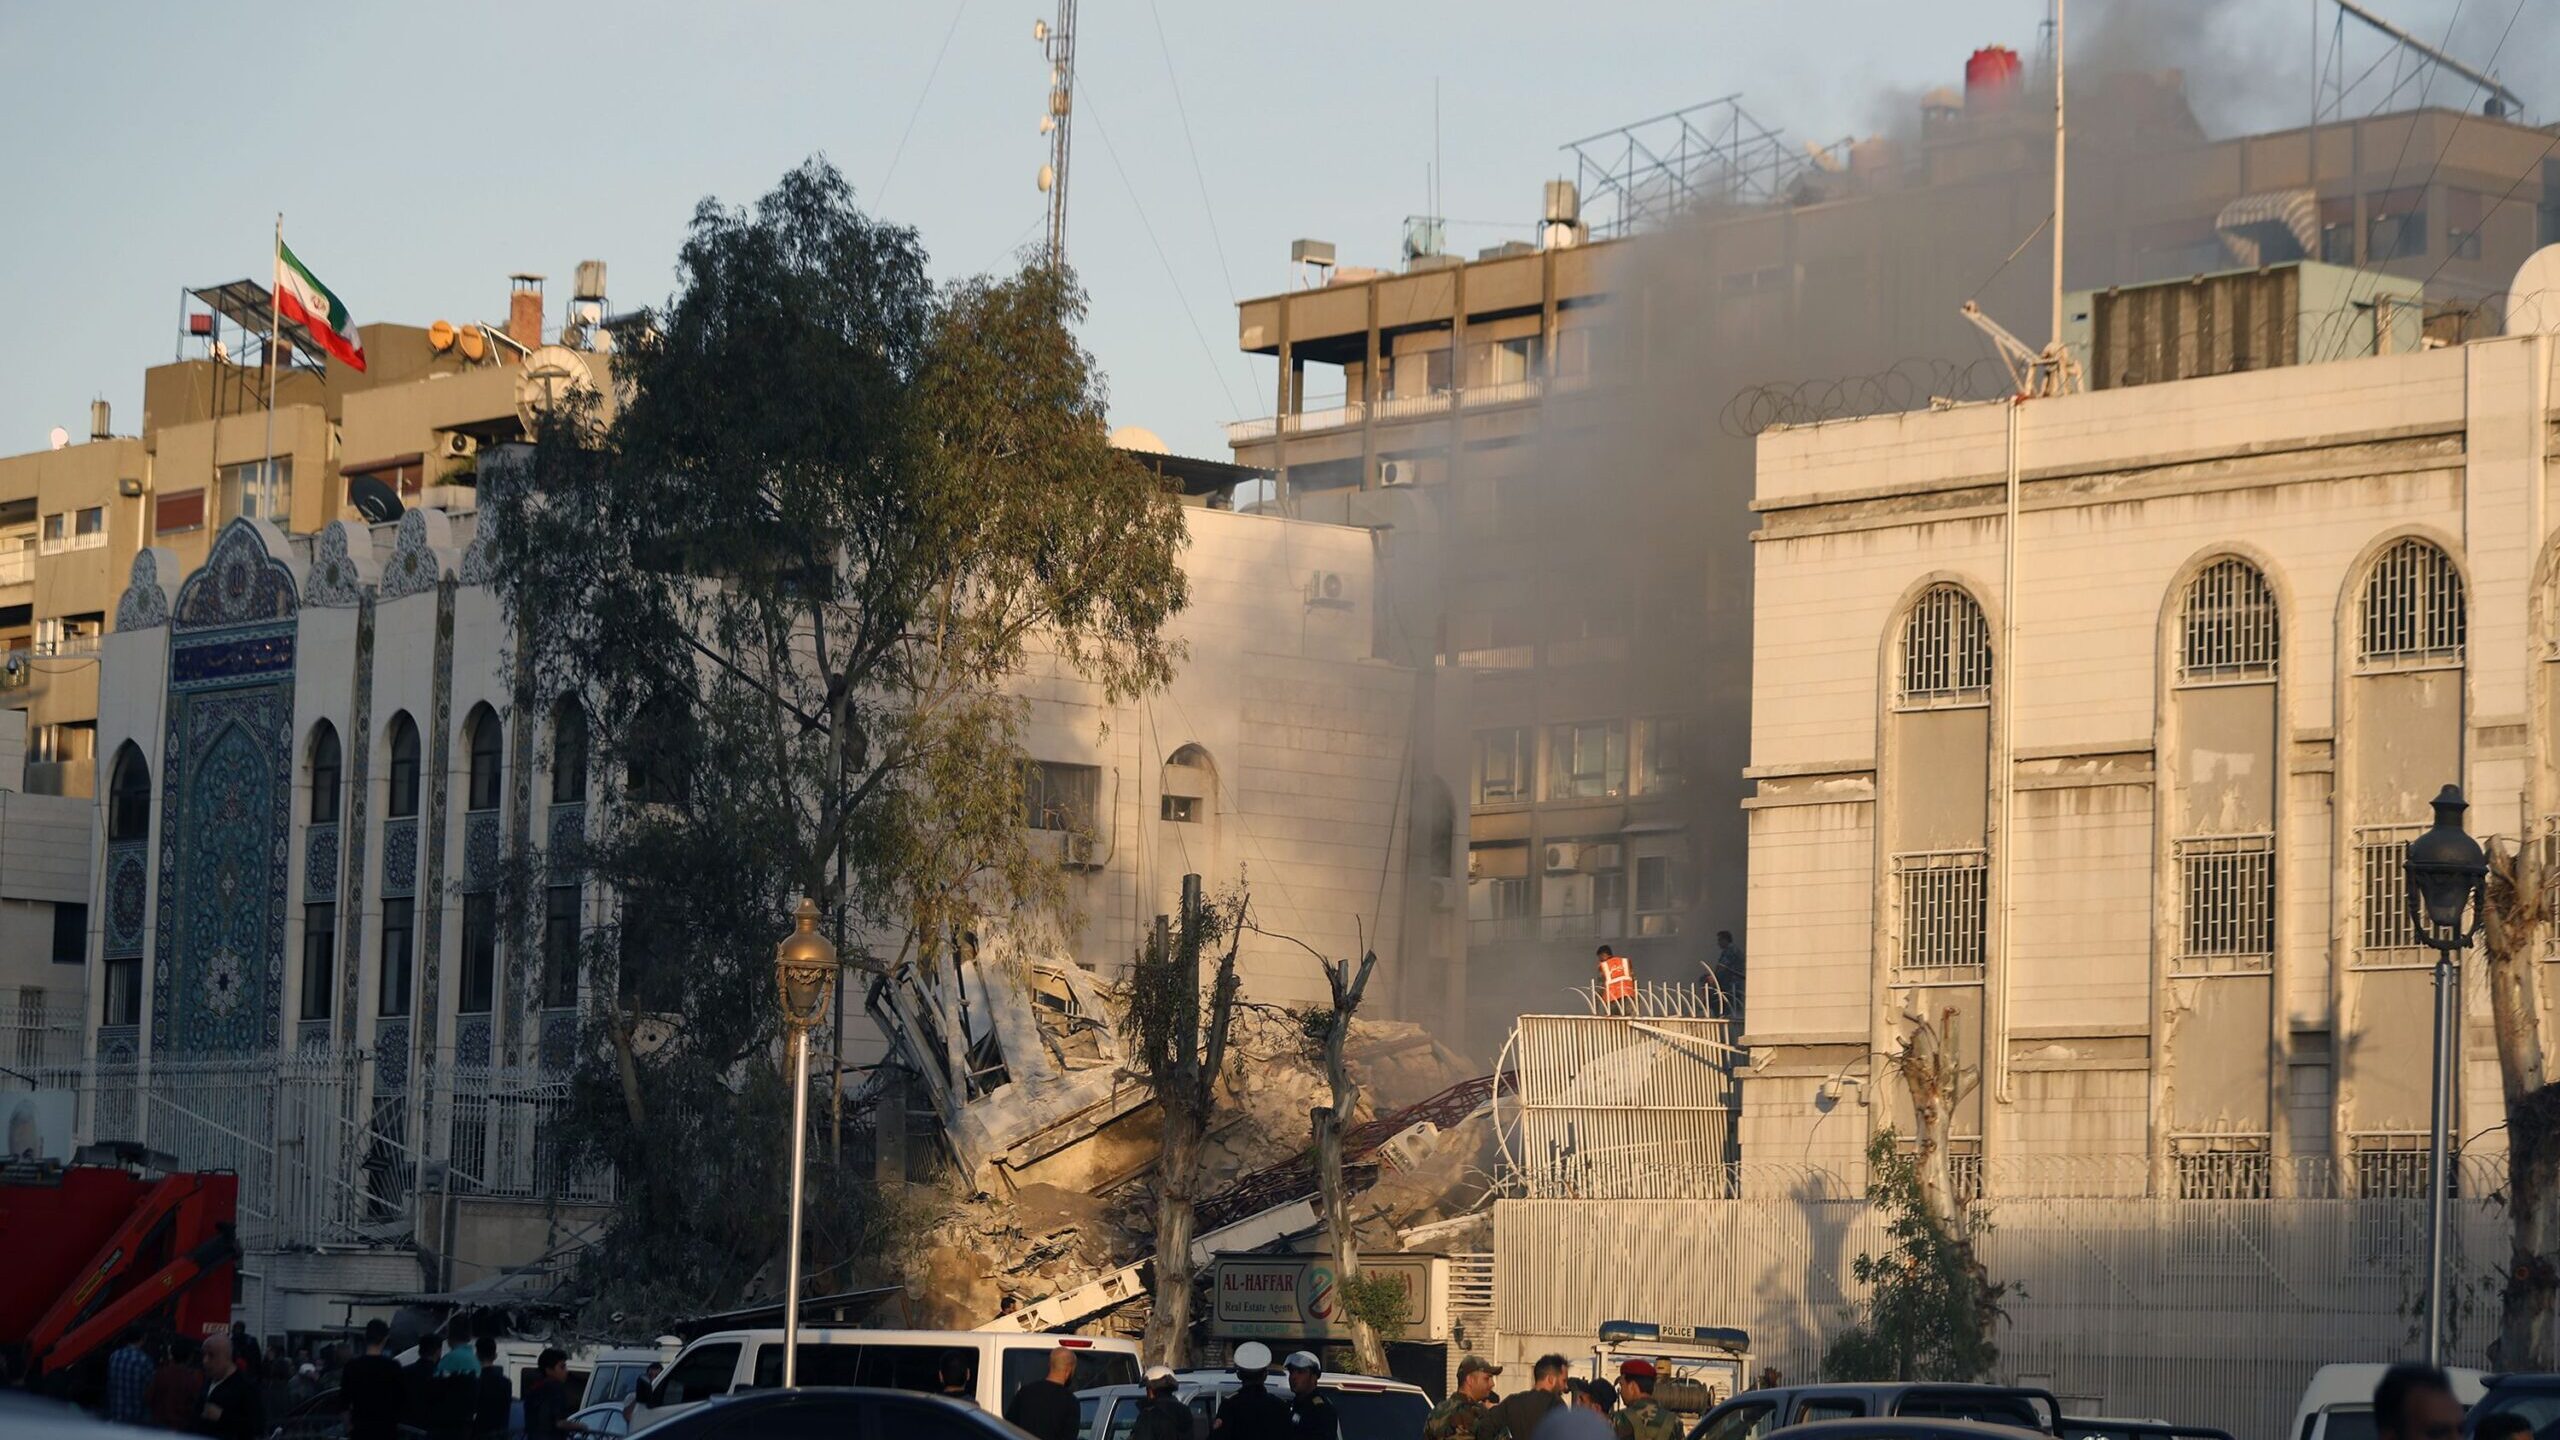 Emergency services work at a destroyed building hit by an air strike in Damascus, Syria on April 1....